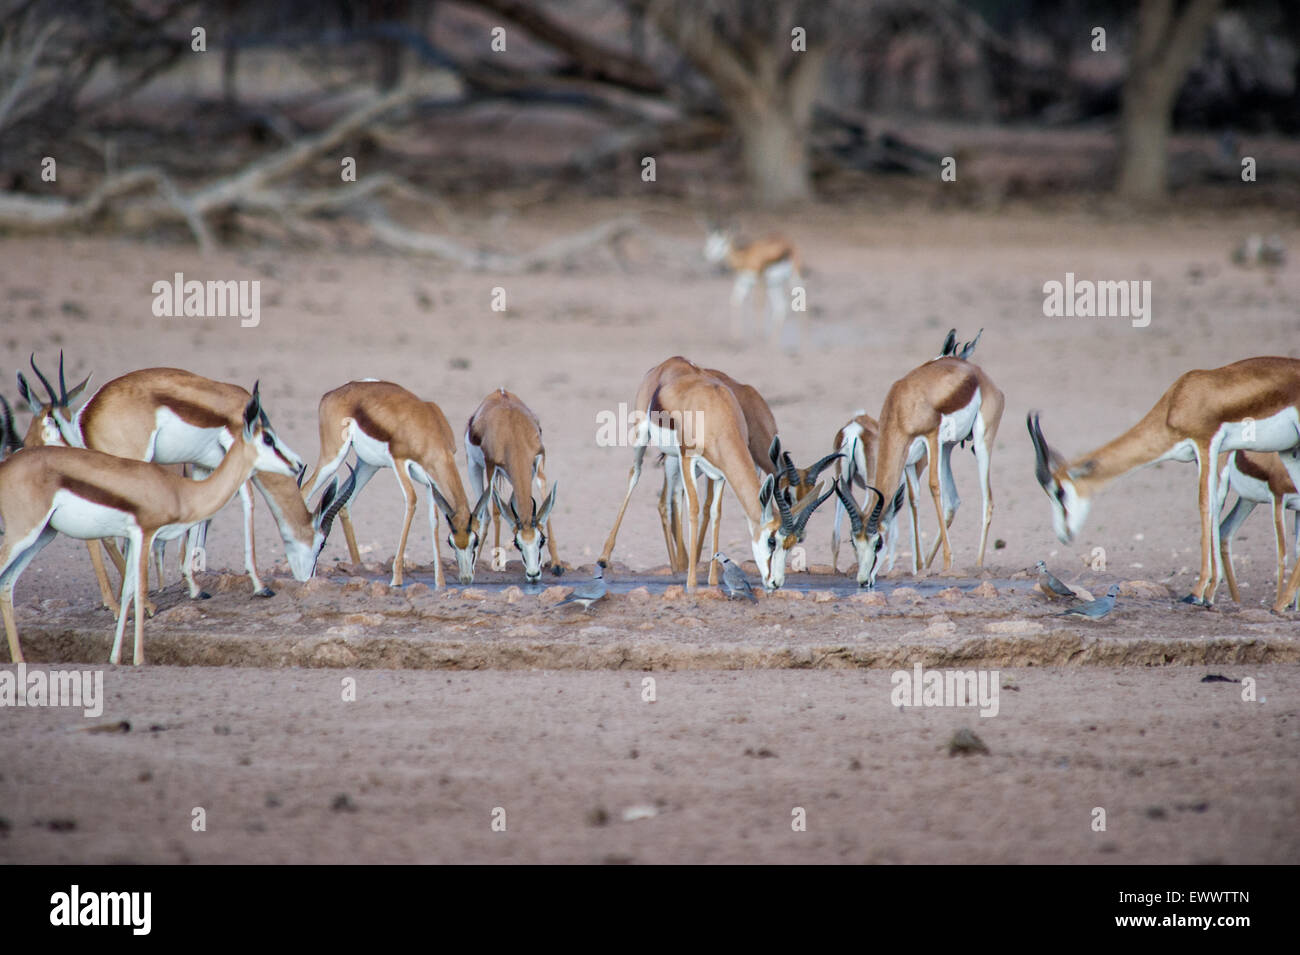 Namibia, Africa - Wild springbok drinking water at a watering hole as a pack Stock Photo